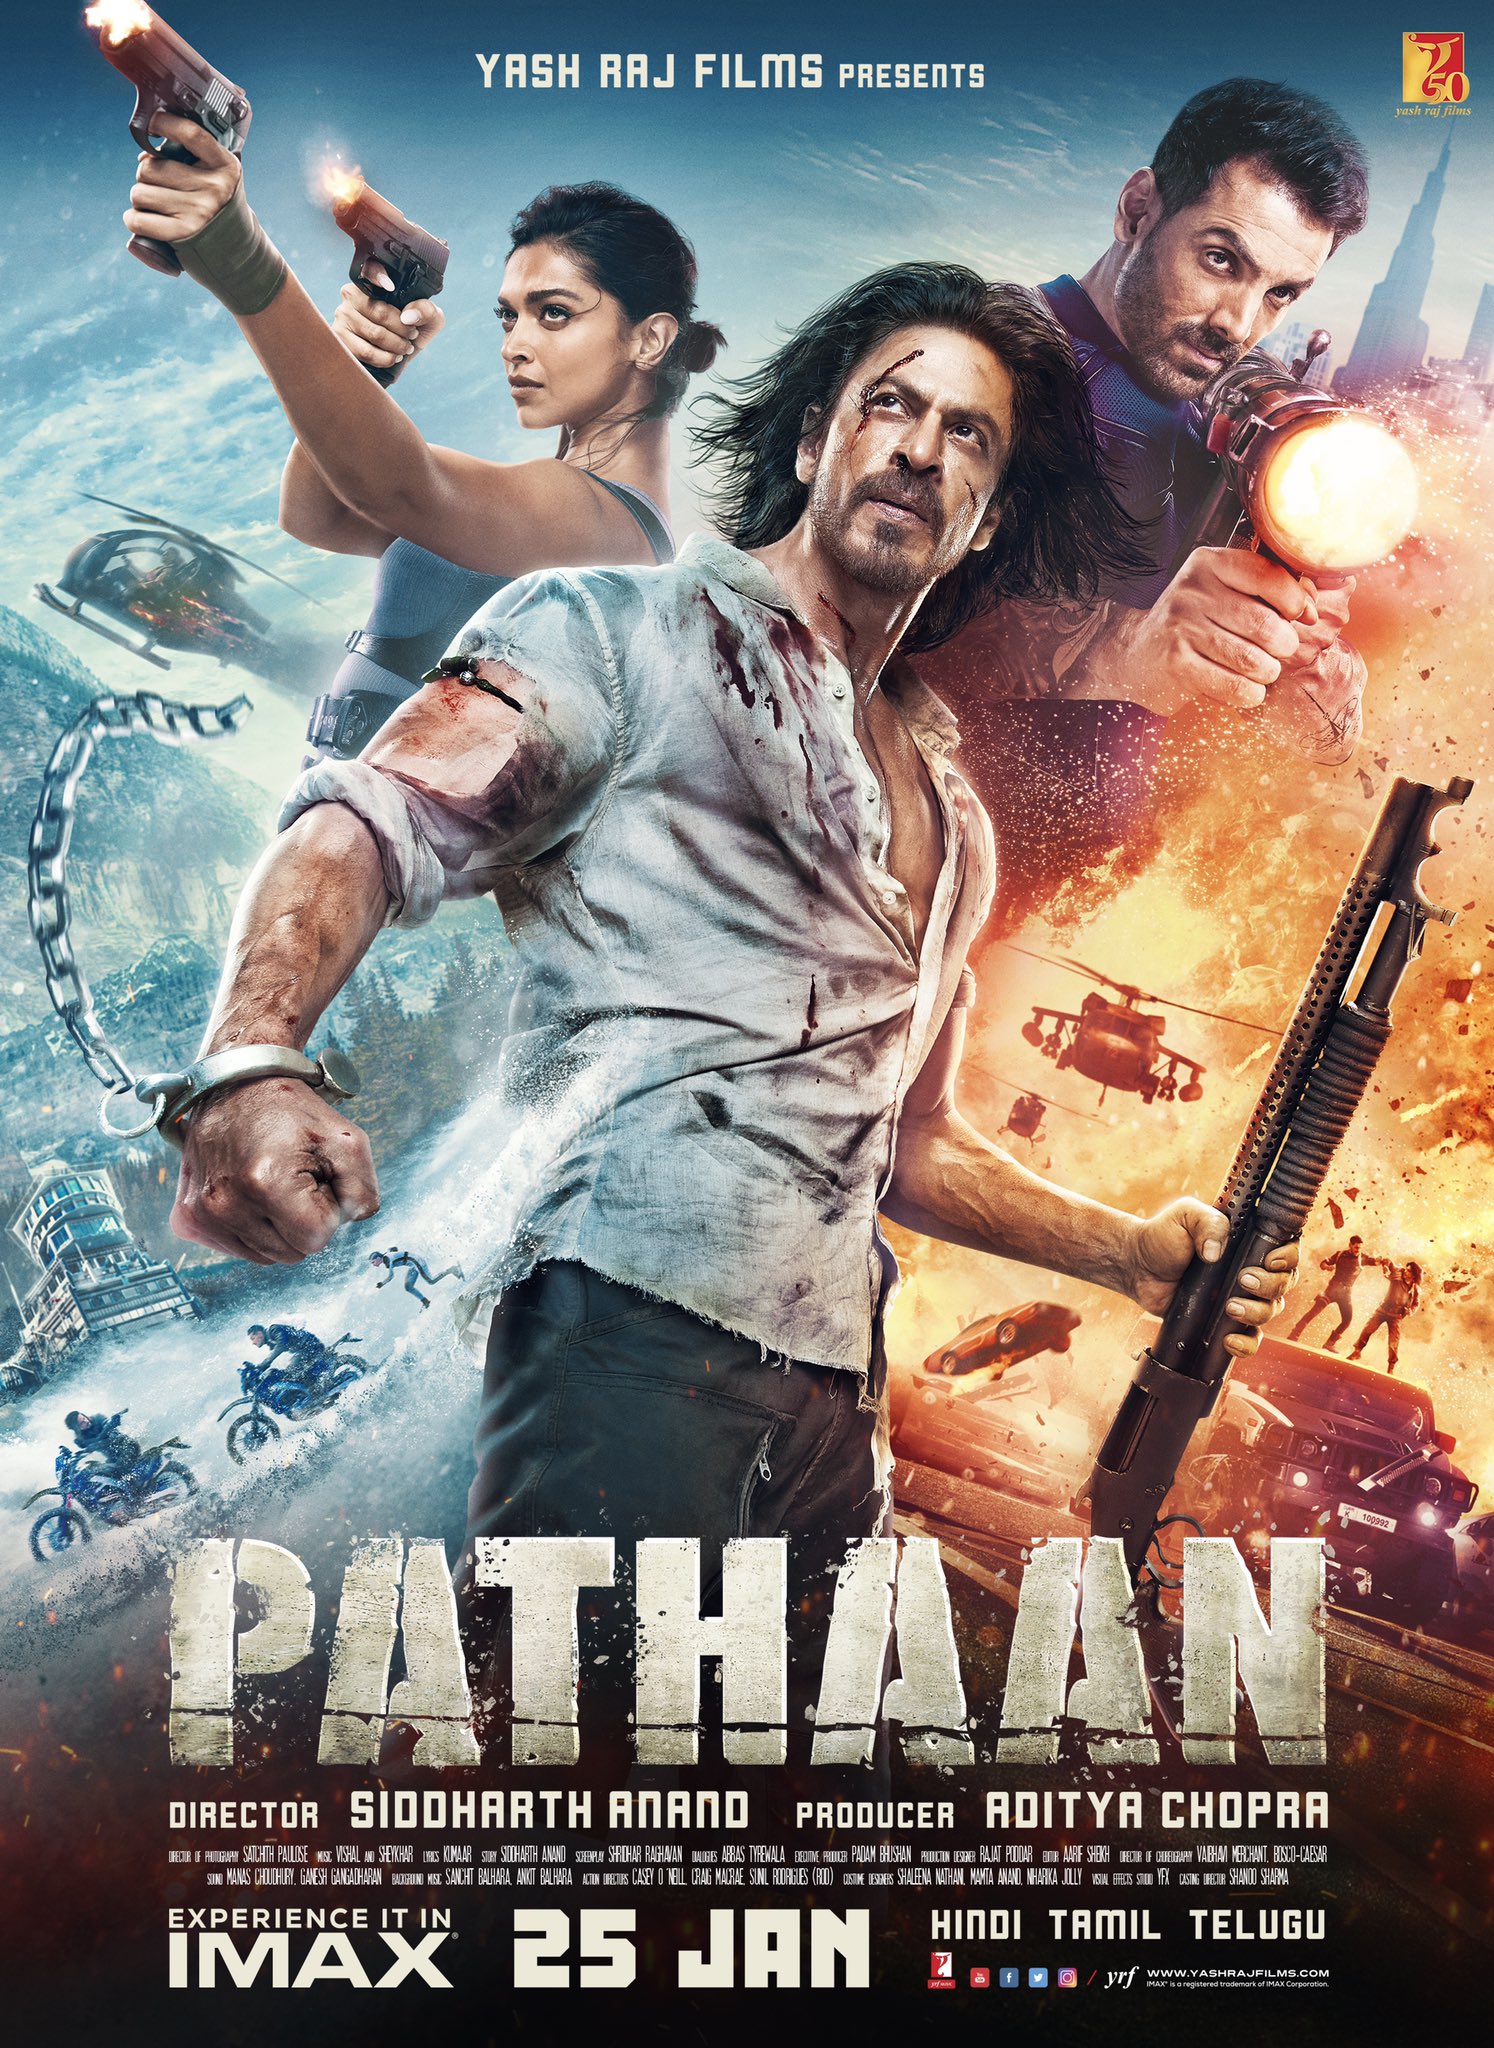 Audience accuses Pathaan teaser is copied from various movies